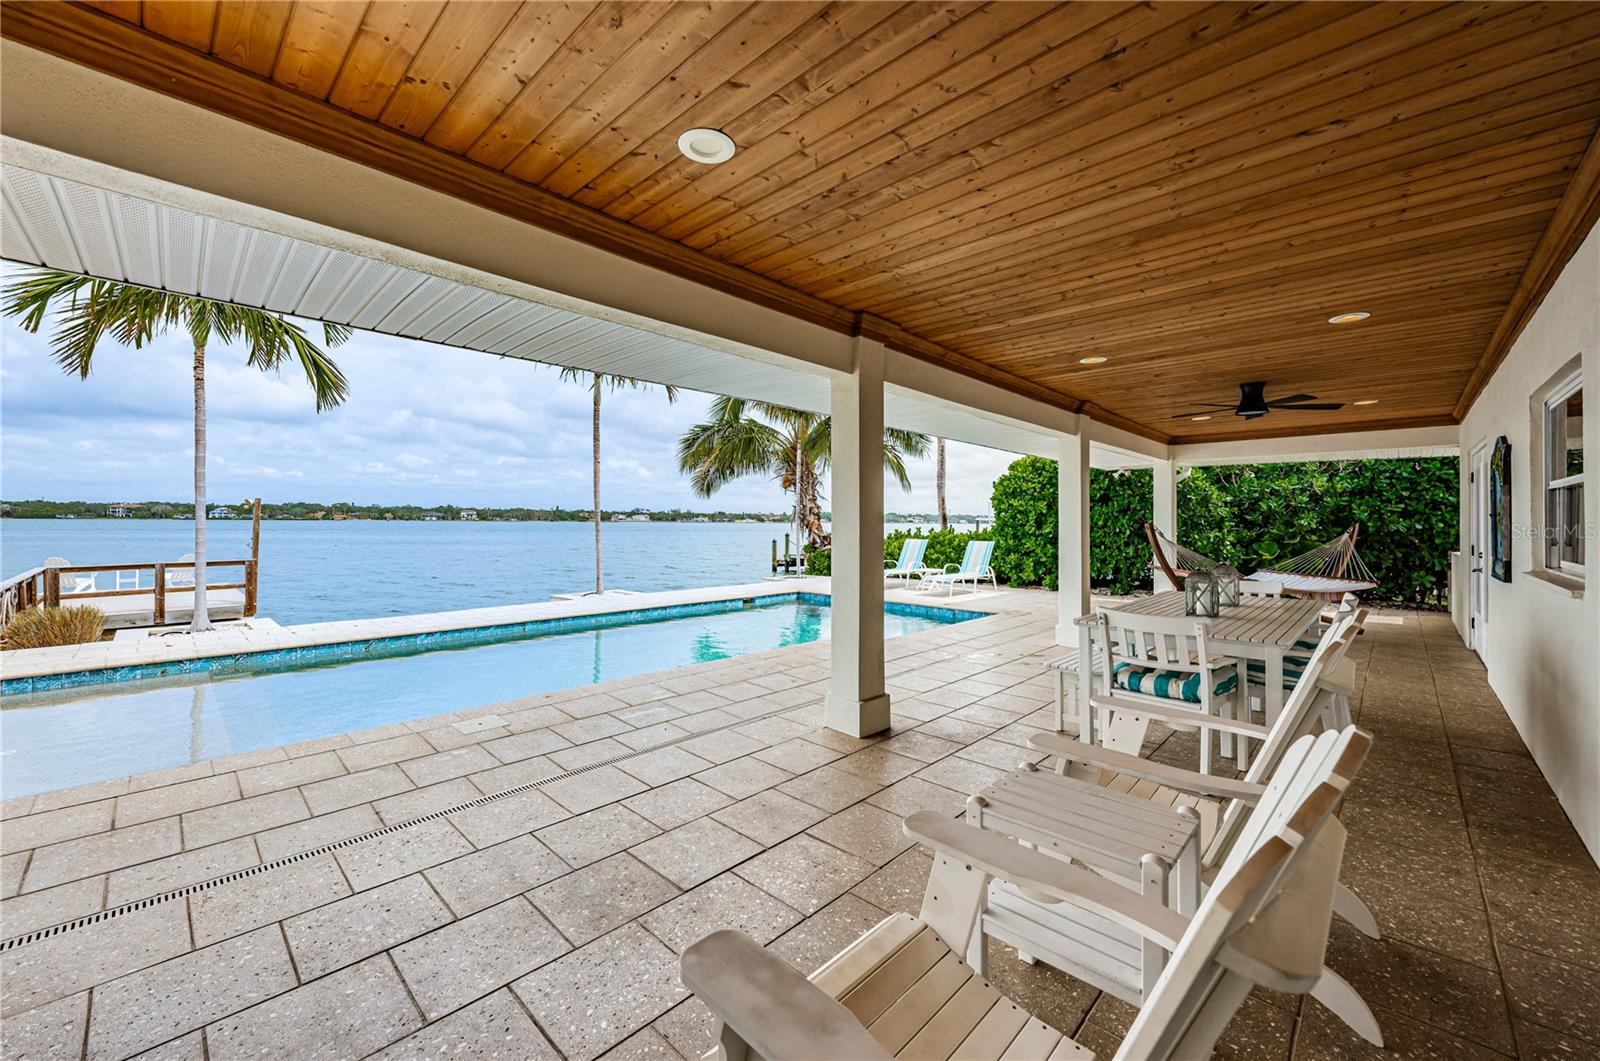 Covered patio pool and open water views